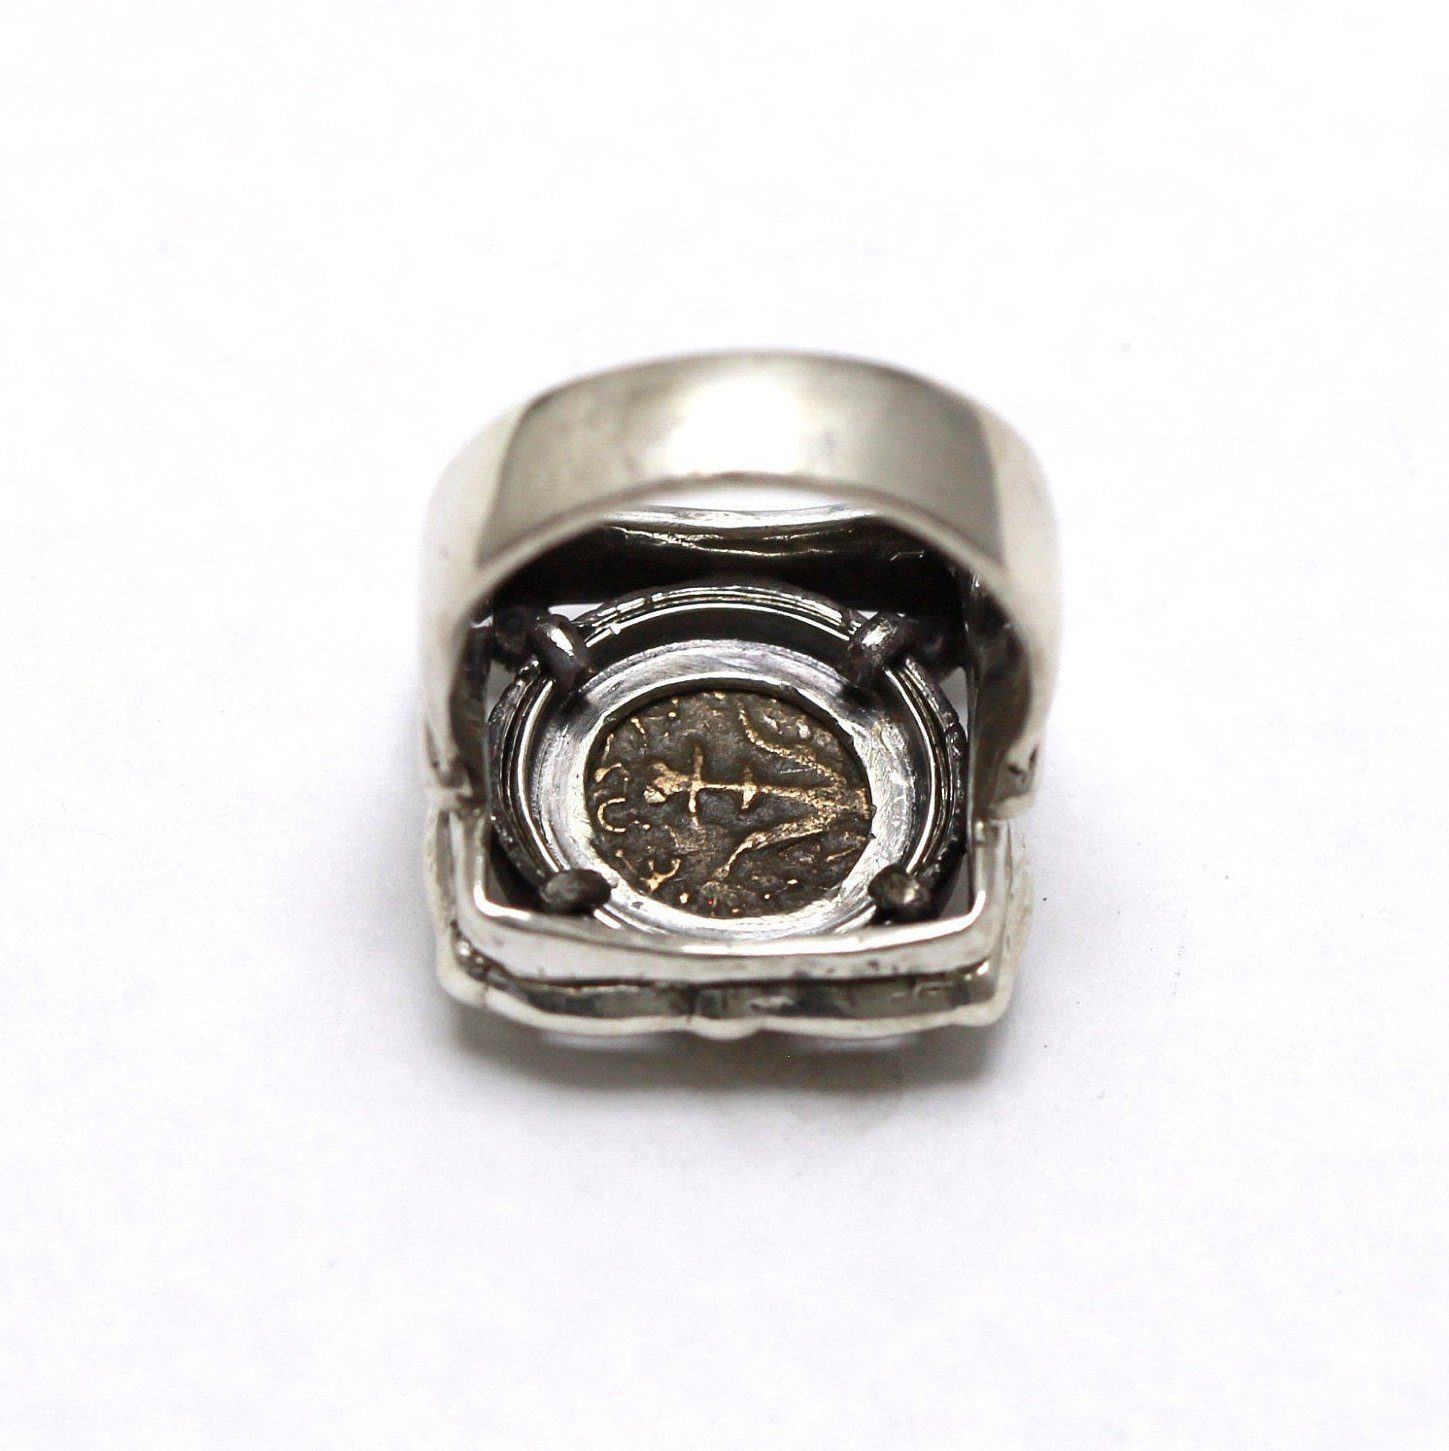 Square Sterling Silver Ring, Widows Mite, Genuine Ancient Prutah Coin, 7097